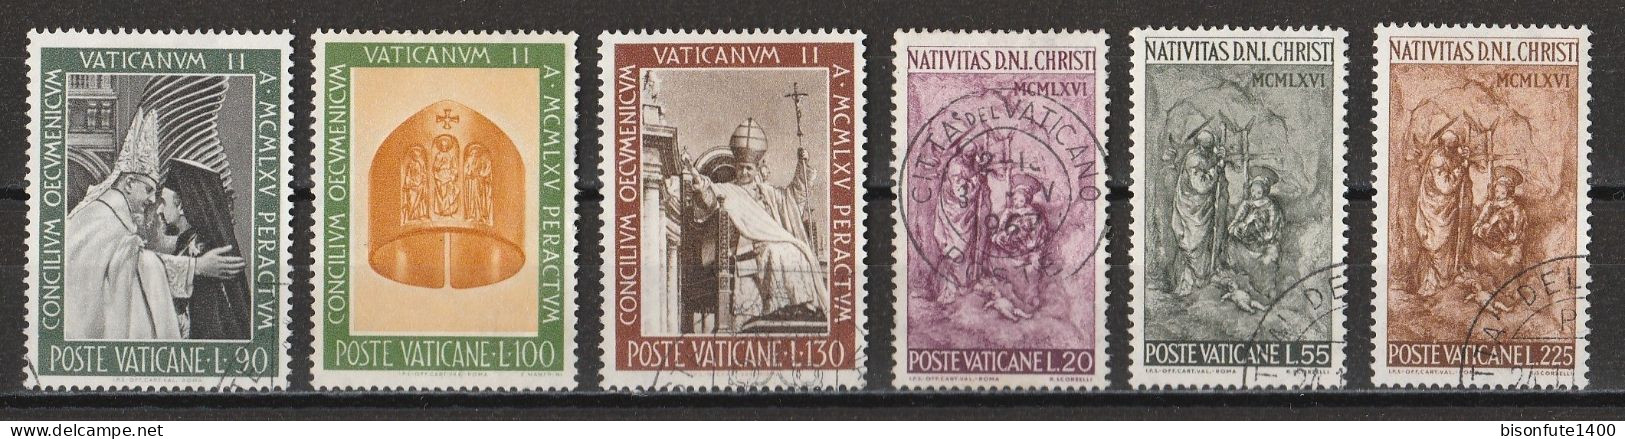 Vatican 1966 : Timbres Yvert & Tellier N° 451 - 452 - 453 - 454 - 455 - 456 - 457 - 458 - 459 - 460 - 461 - 462 -....... - Used Stamps